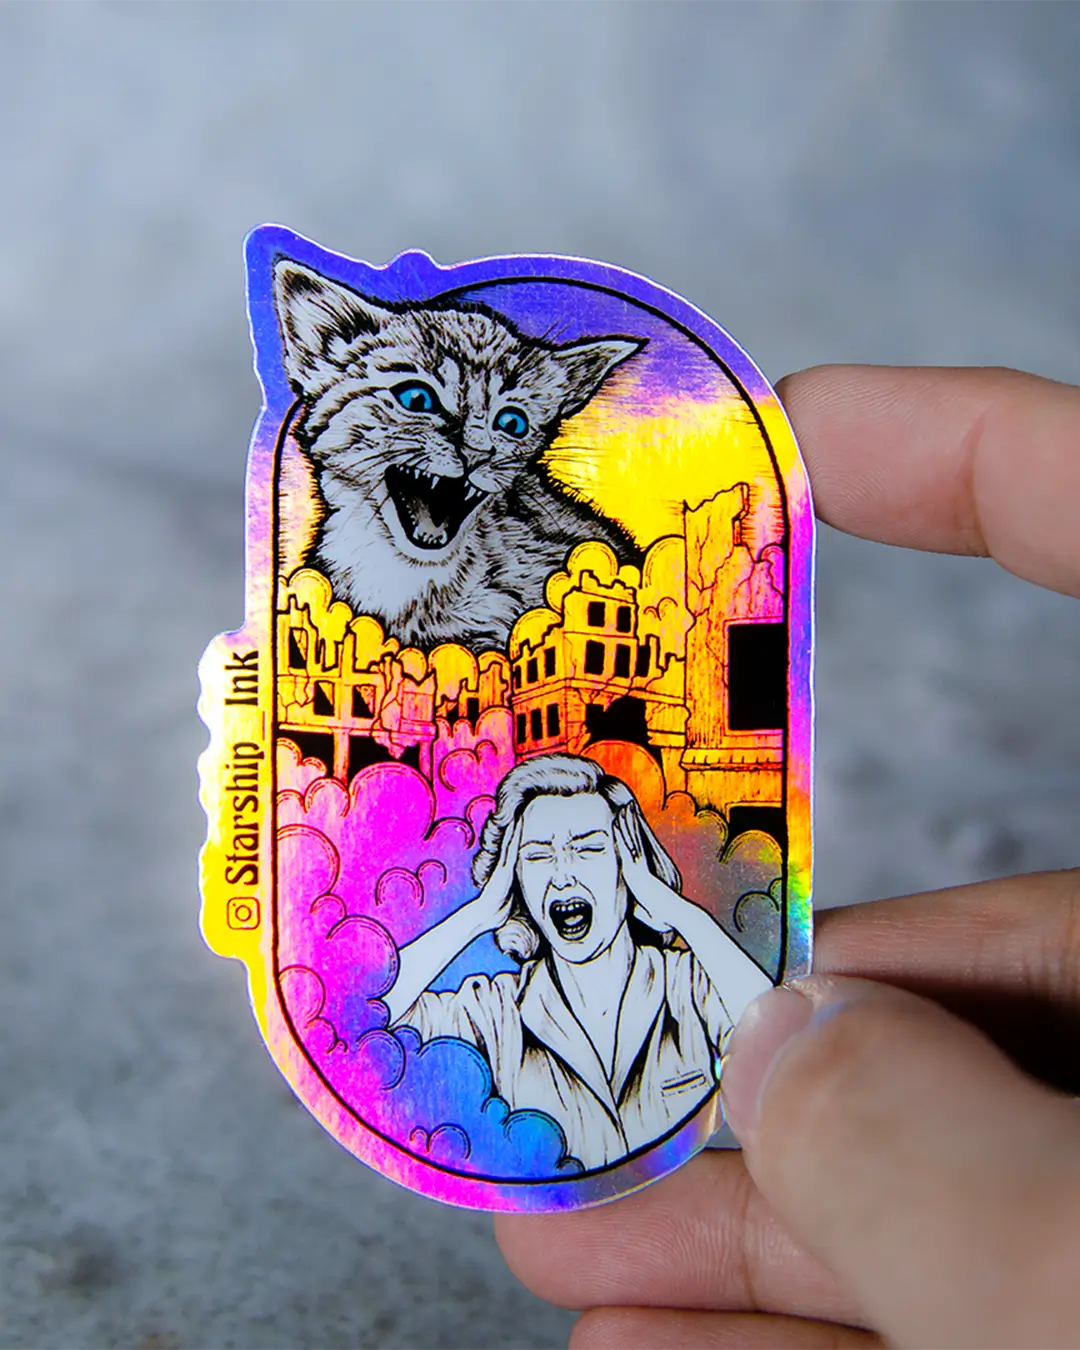 Holographic Stickers